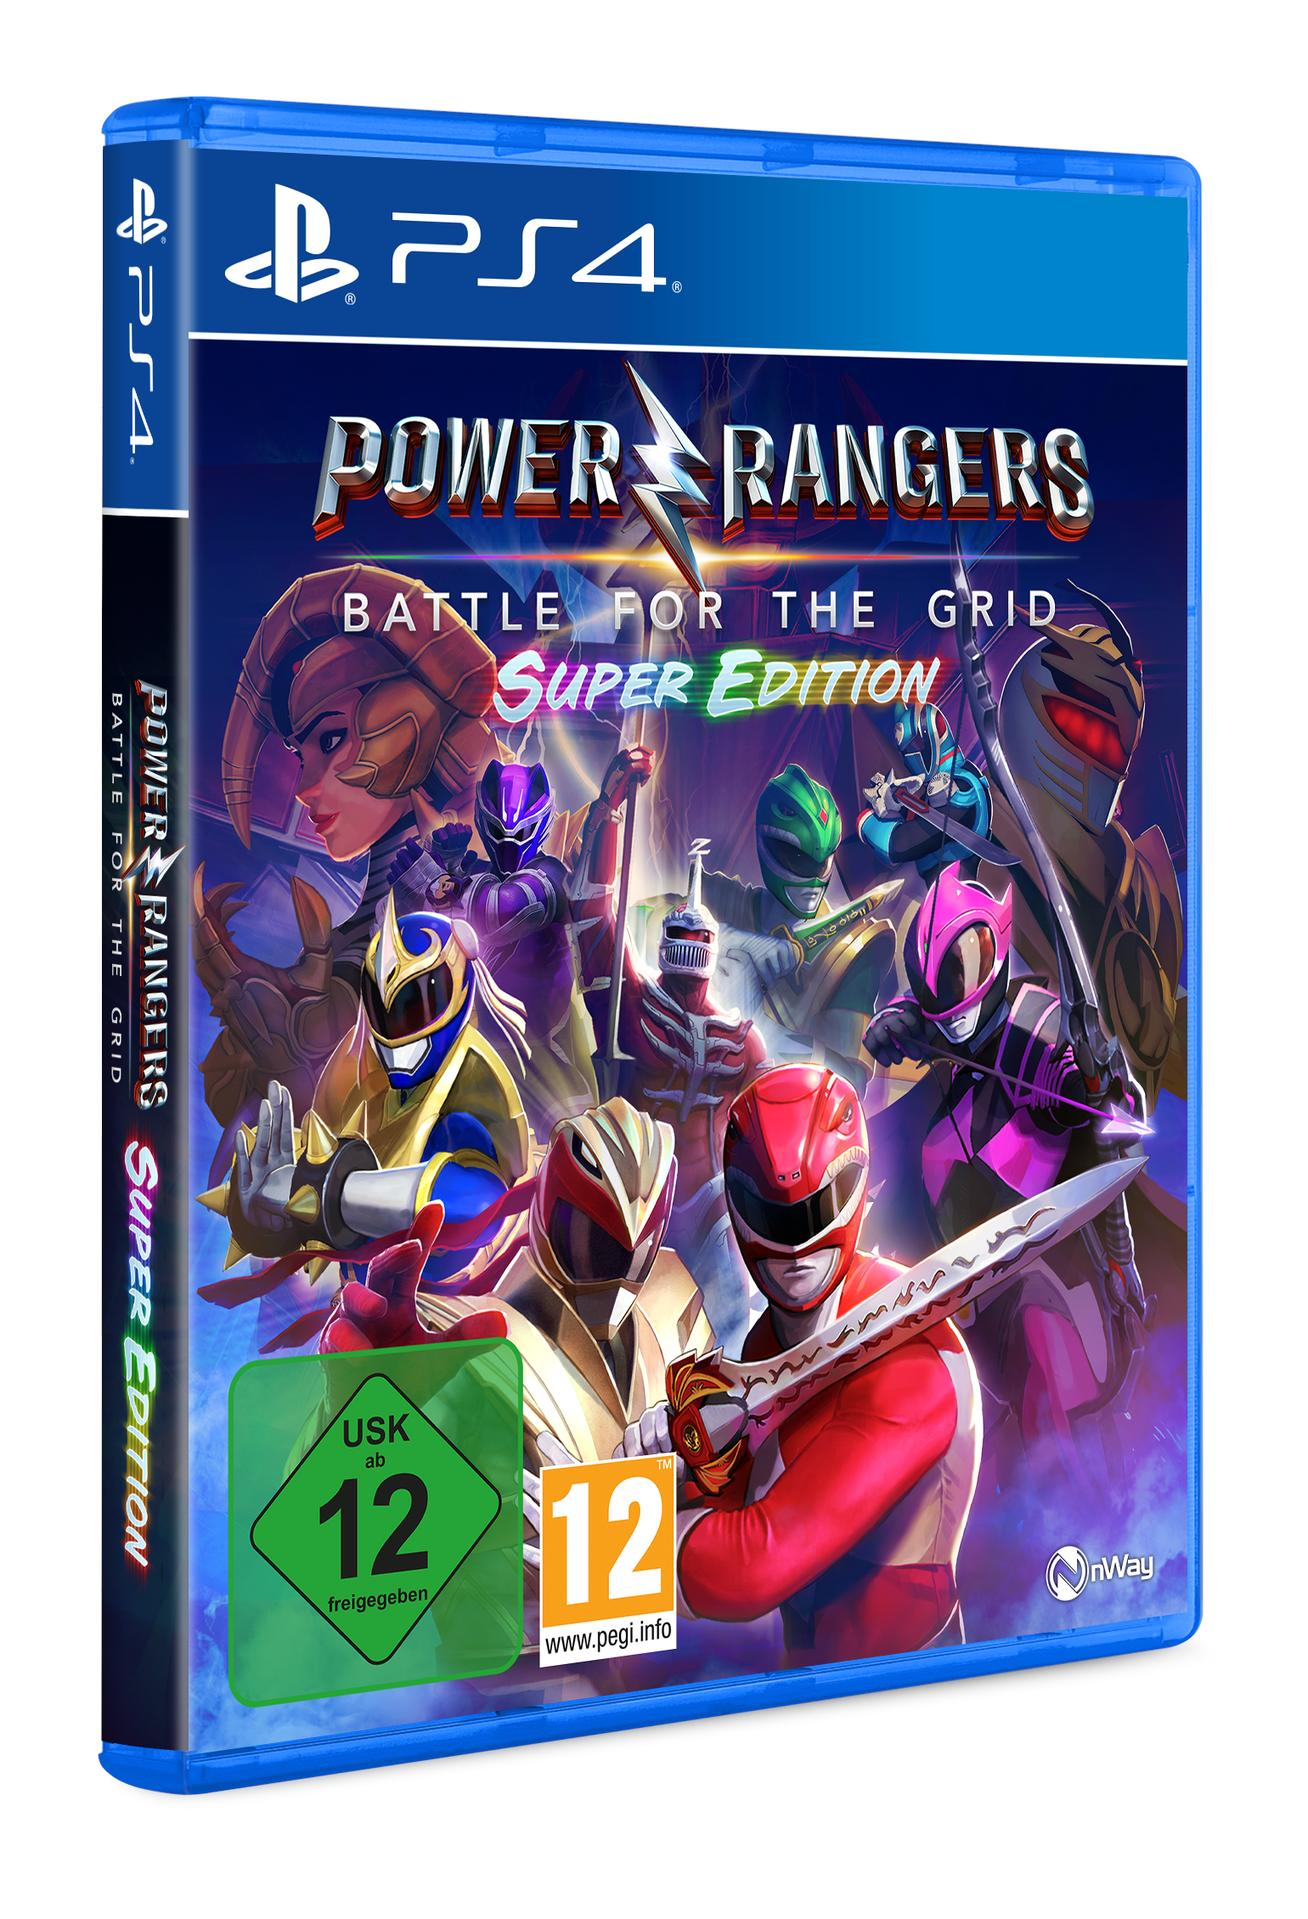 [PlayStation - Grid Power Battle the - Rangers: Edition 4] Super for